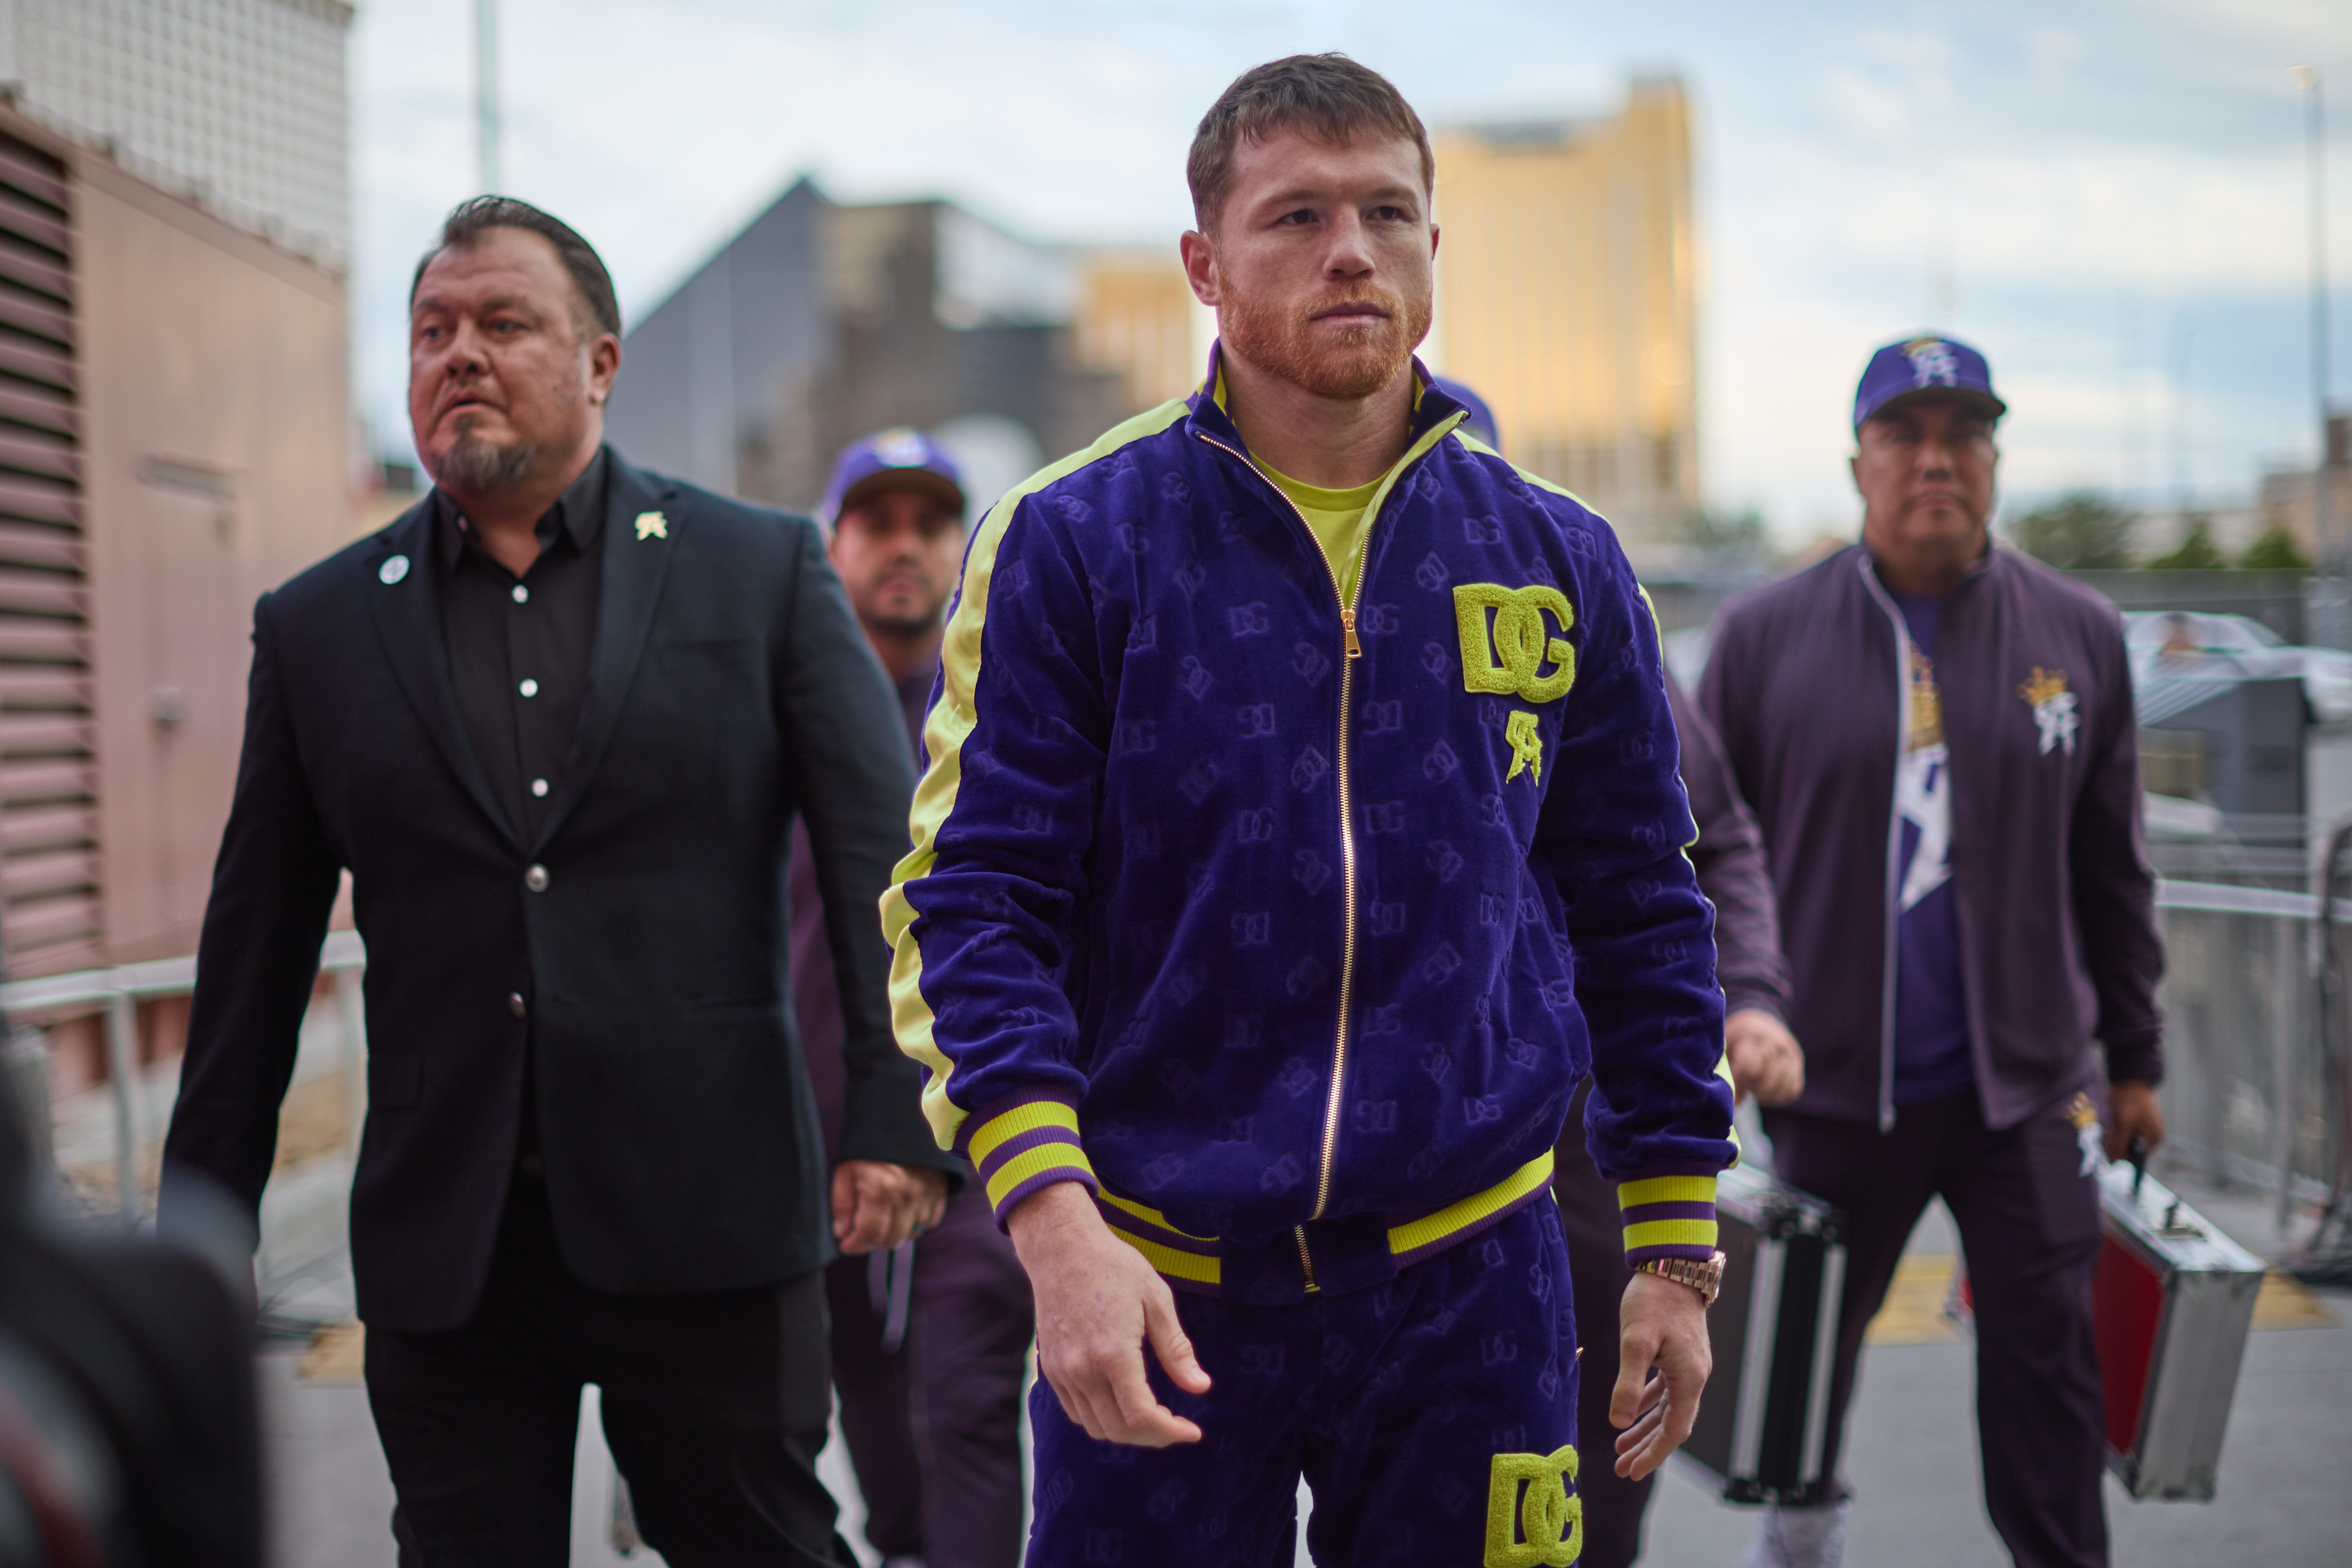 What will Canelo’s announcement be?